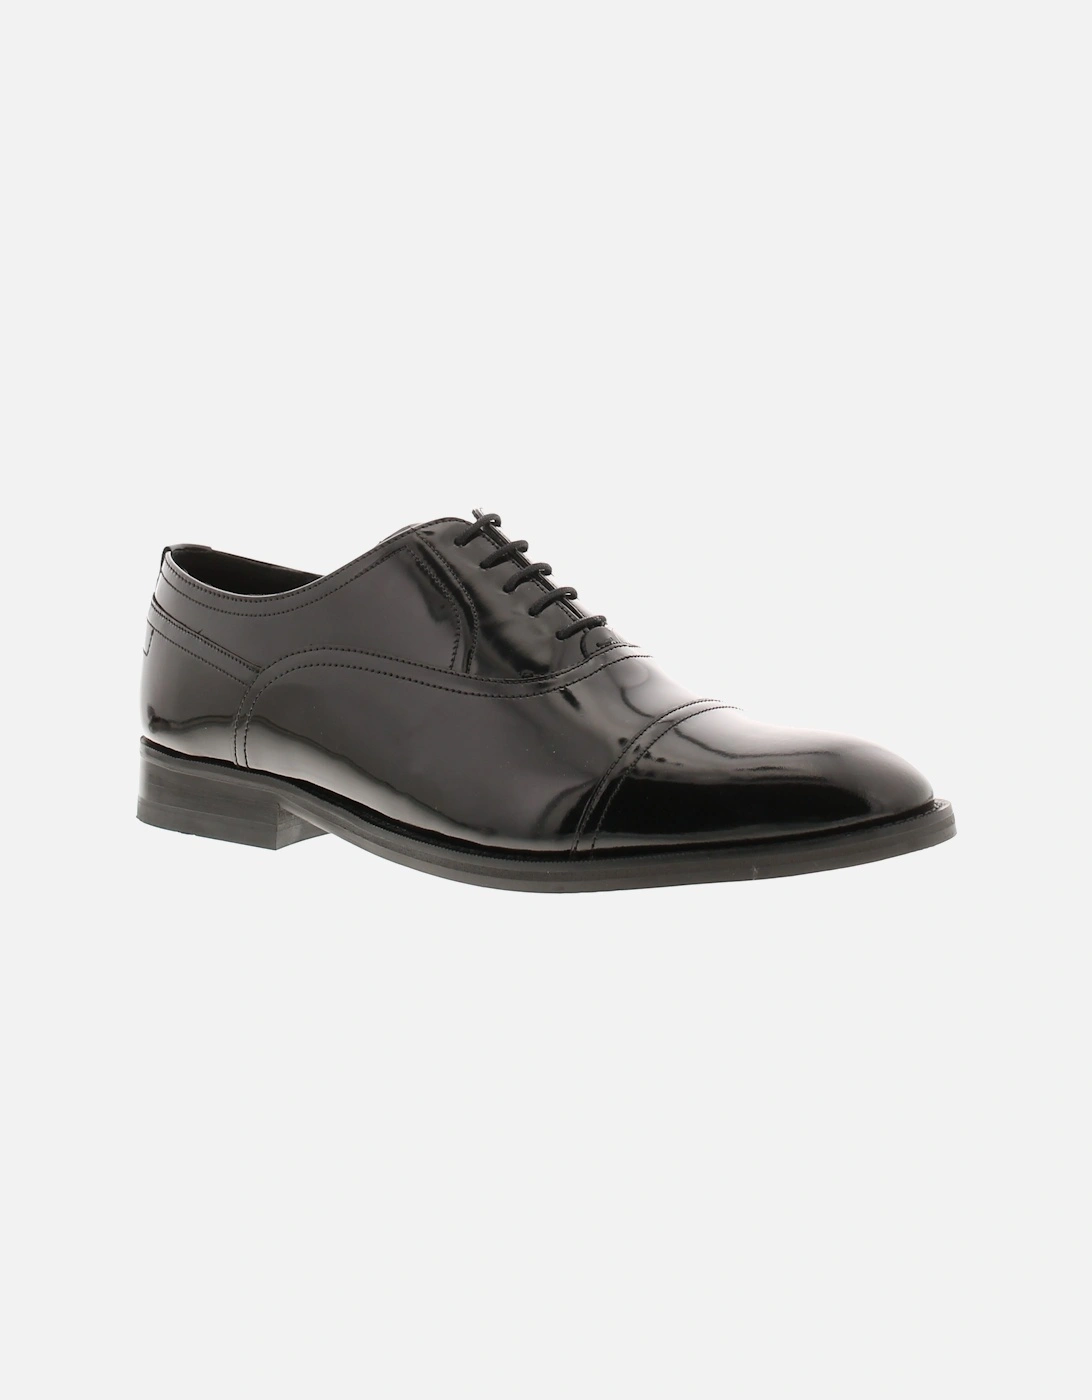 Mens Shoes Lace Up Carlenp Oxford Derby Smart Leather Black UK Size, 6 of 5